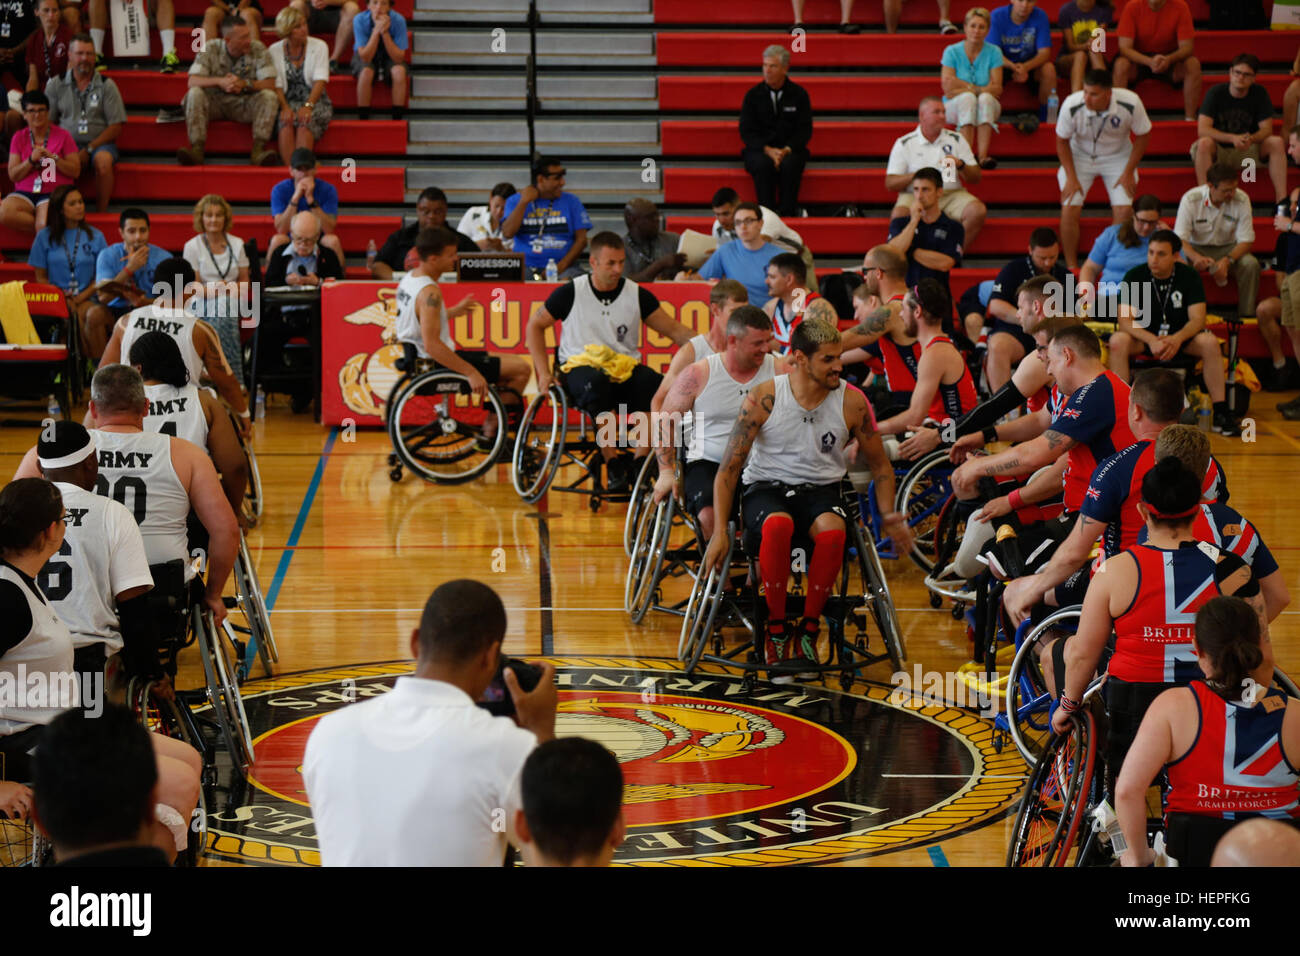 U.S. Army active duty and Veteran athletes shake hands with Team British Armed Forces before the wheelchair basketball competition during the 2015 Department of Defense Warrior Games at Barber Fitness Center, Marine Corps Base Quantico, Va., June 21, 2015. The 2015 DOD Warrior Games are held June 19-28. The games are an adaptive sports competition for wounded, ill and injured service members and Veterans. Approximately 250 athletes representing teams from the Army, Marine Corps, Navy, Air Force, Special Operations Command and the British Armed Forces will compete in archery, cycling, shooting, Stock Photo